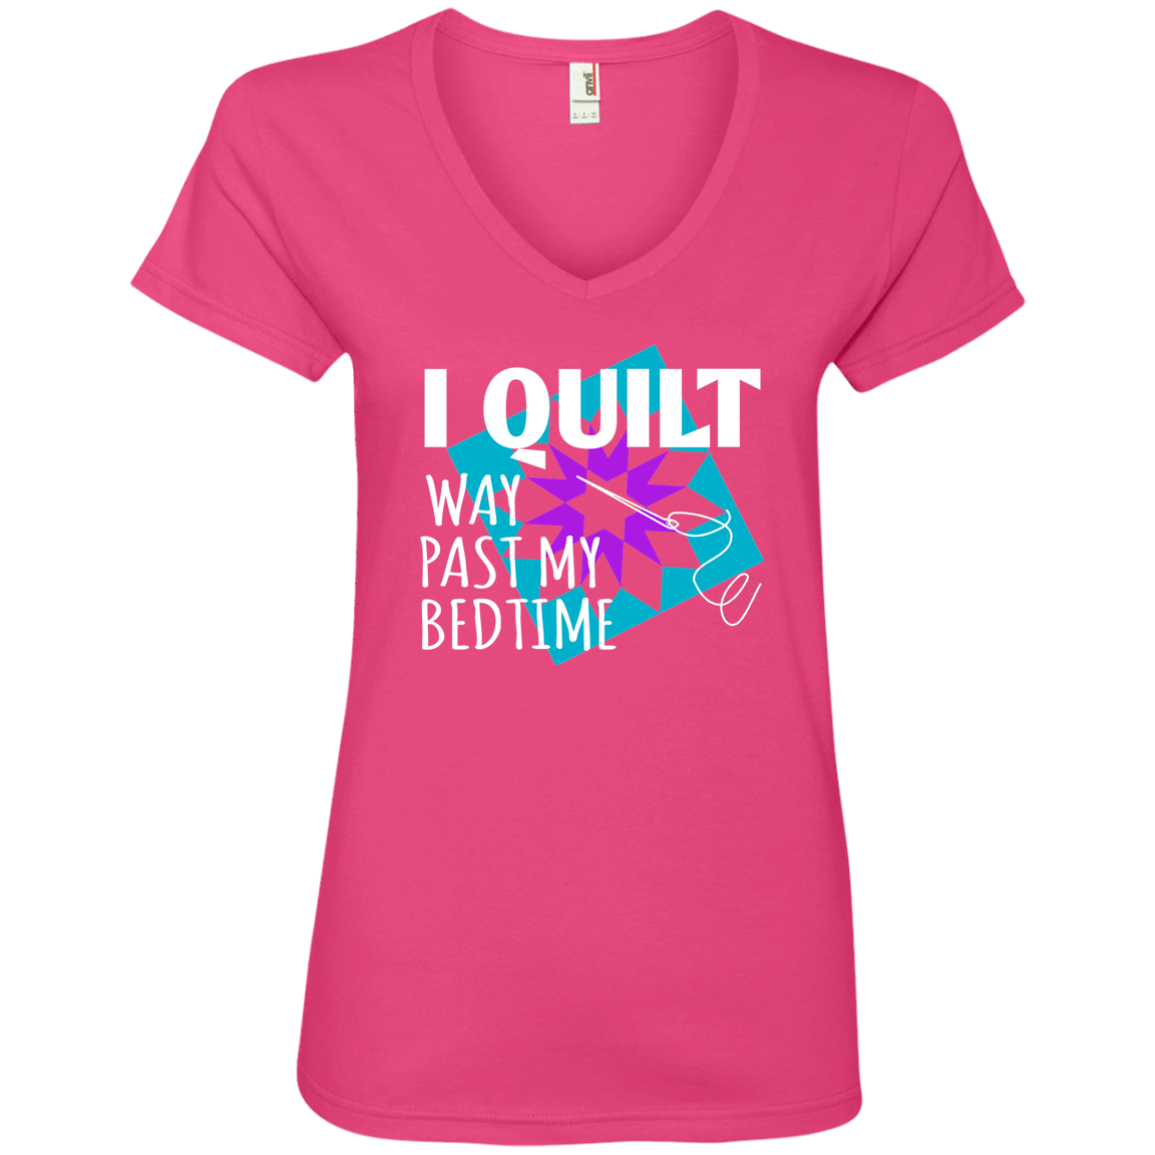 I Quilt Way Past My Bedtime Ladies V-Neck T-Shirt